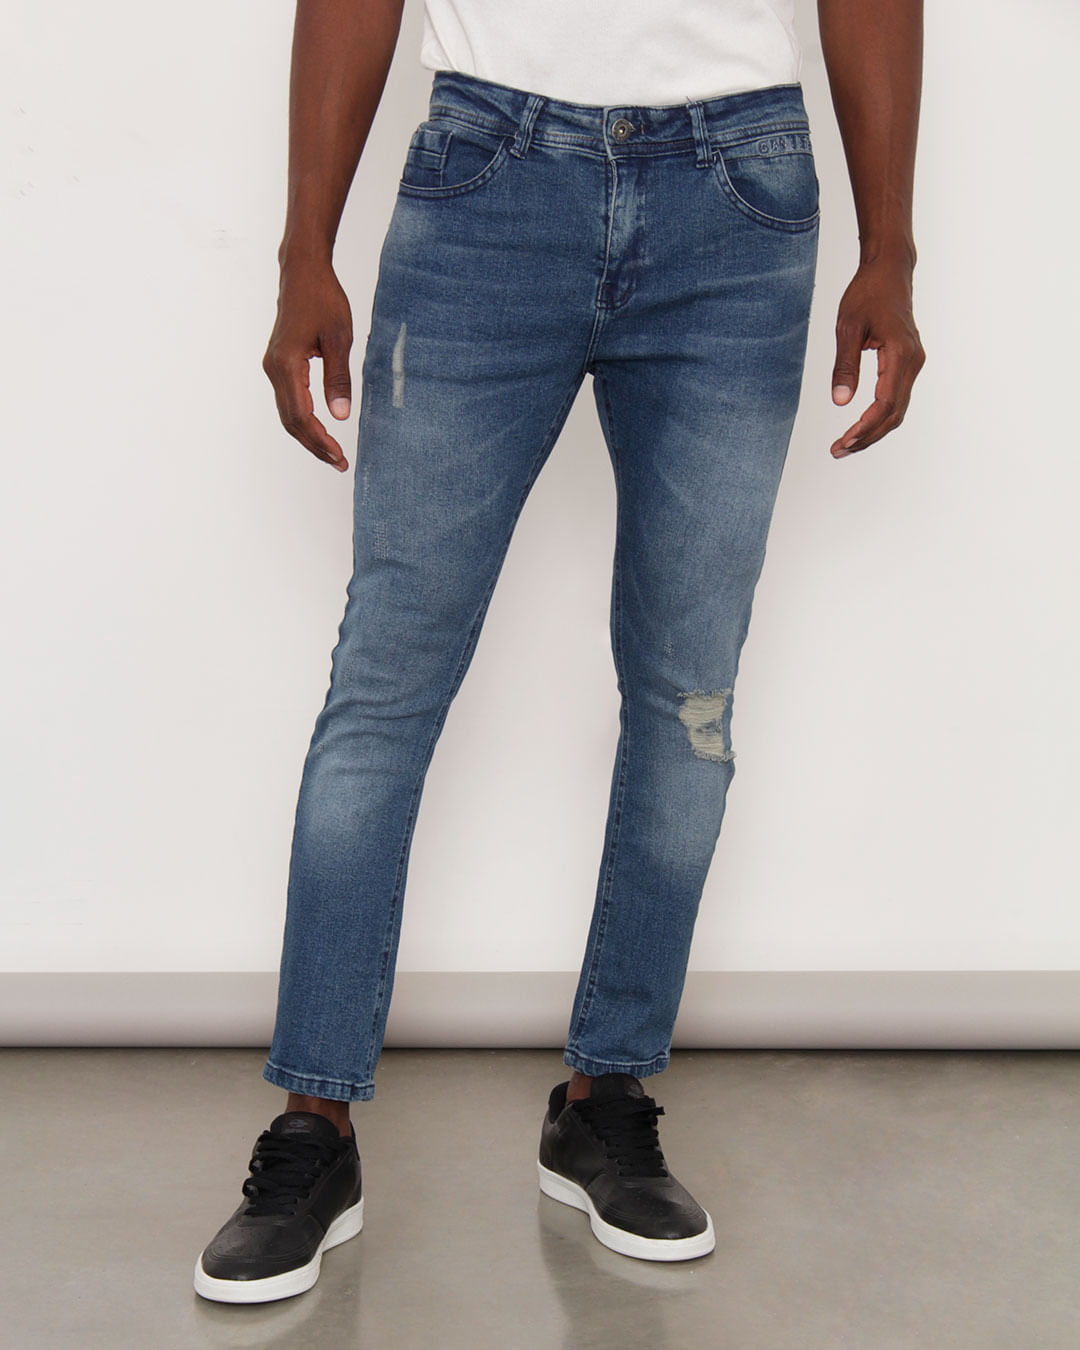 Calca-Jeans-Masculina-Gangster-Cropped-Destroyed-Azul